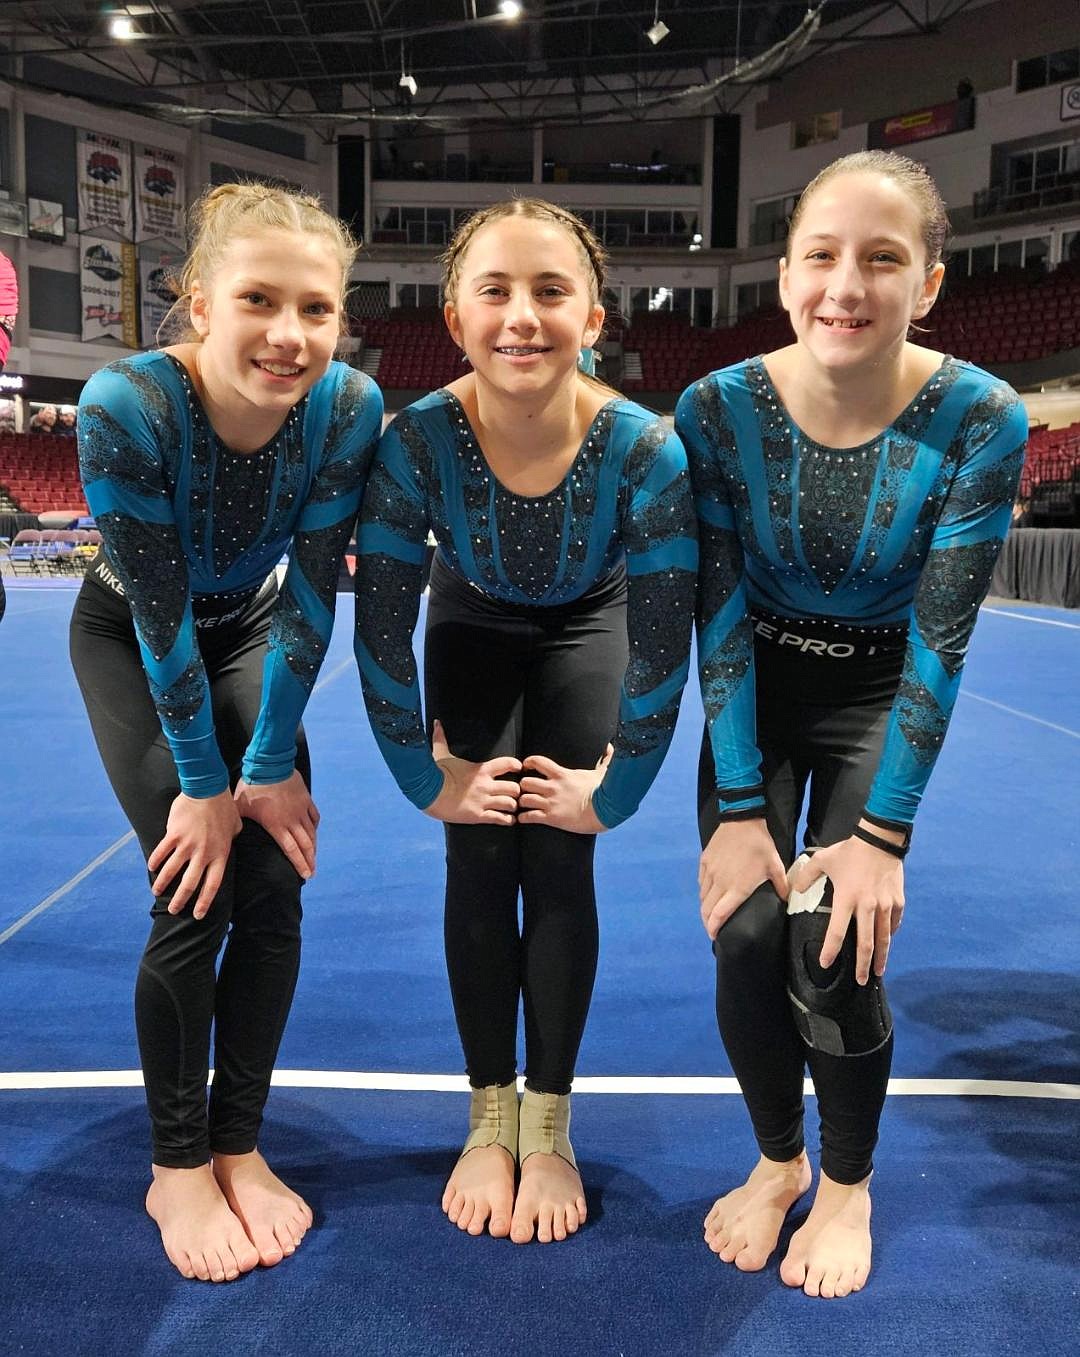 Courtesy photo
Technique Gymnastics DP Level 6 team at Idaho state championships in Boise From left are Reece Lierman (9.225 FX), Madalynn Beggerly (Idaho State Champion on BB & FX, 2nd AA) and Taylynn Lee (9.075 FX).